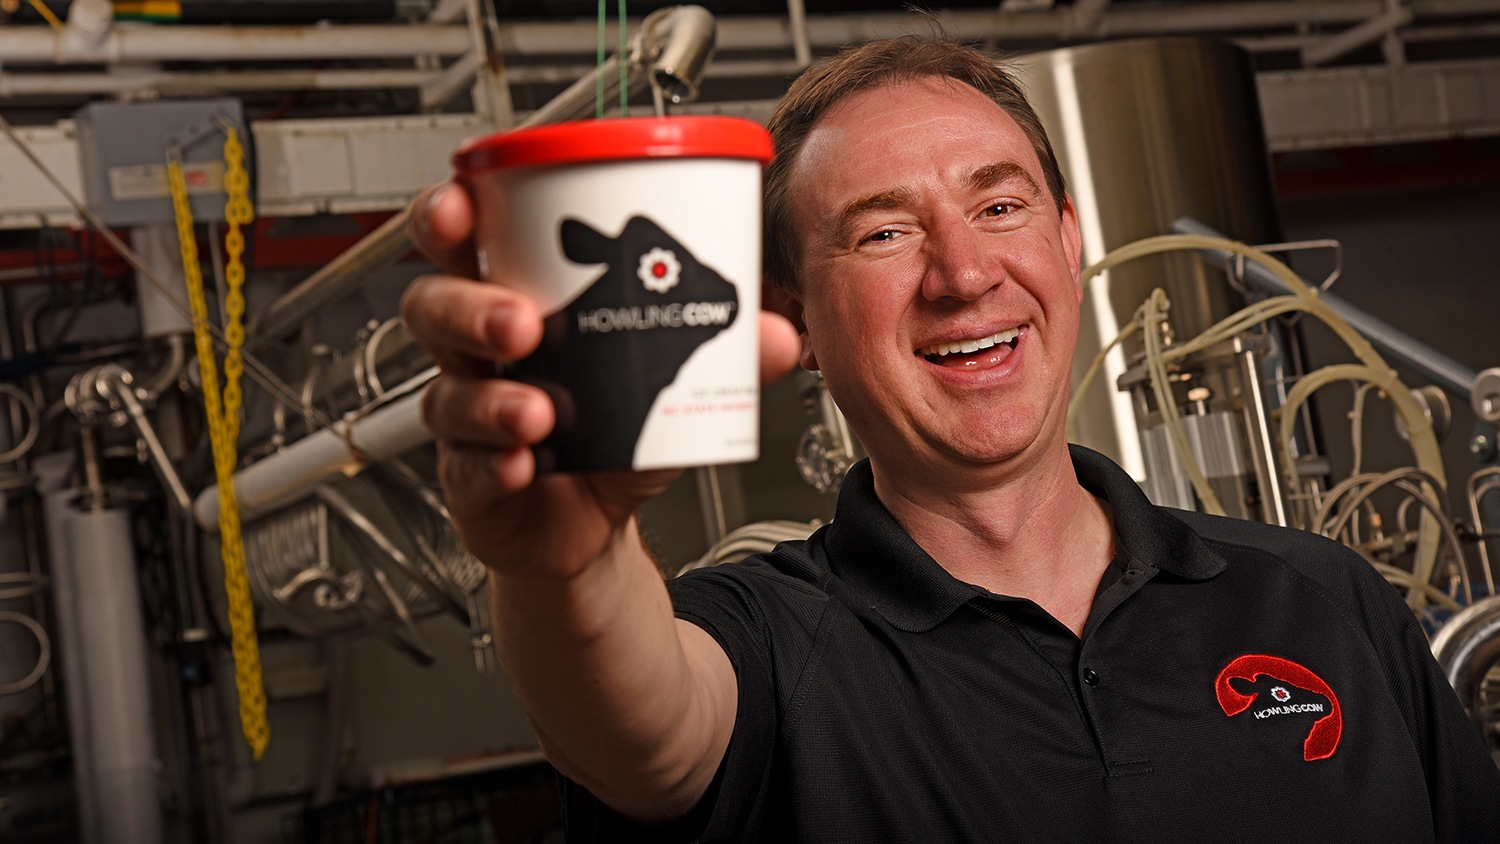 Carl Hollifield, the "man behind Howling Cow."